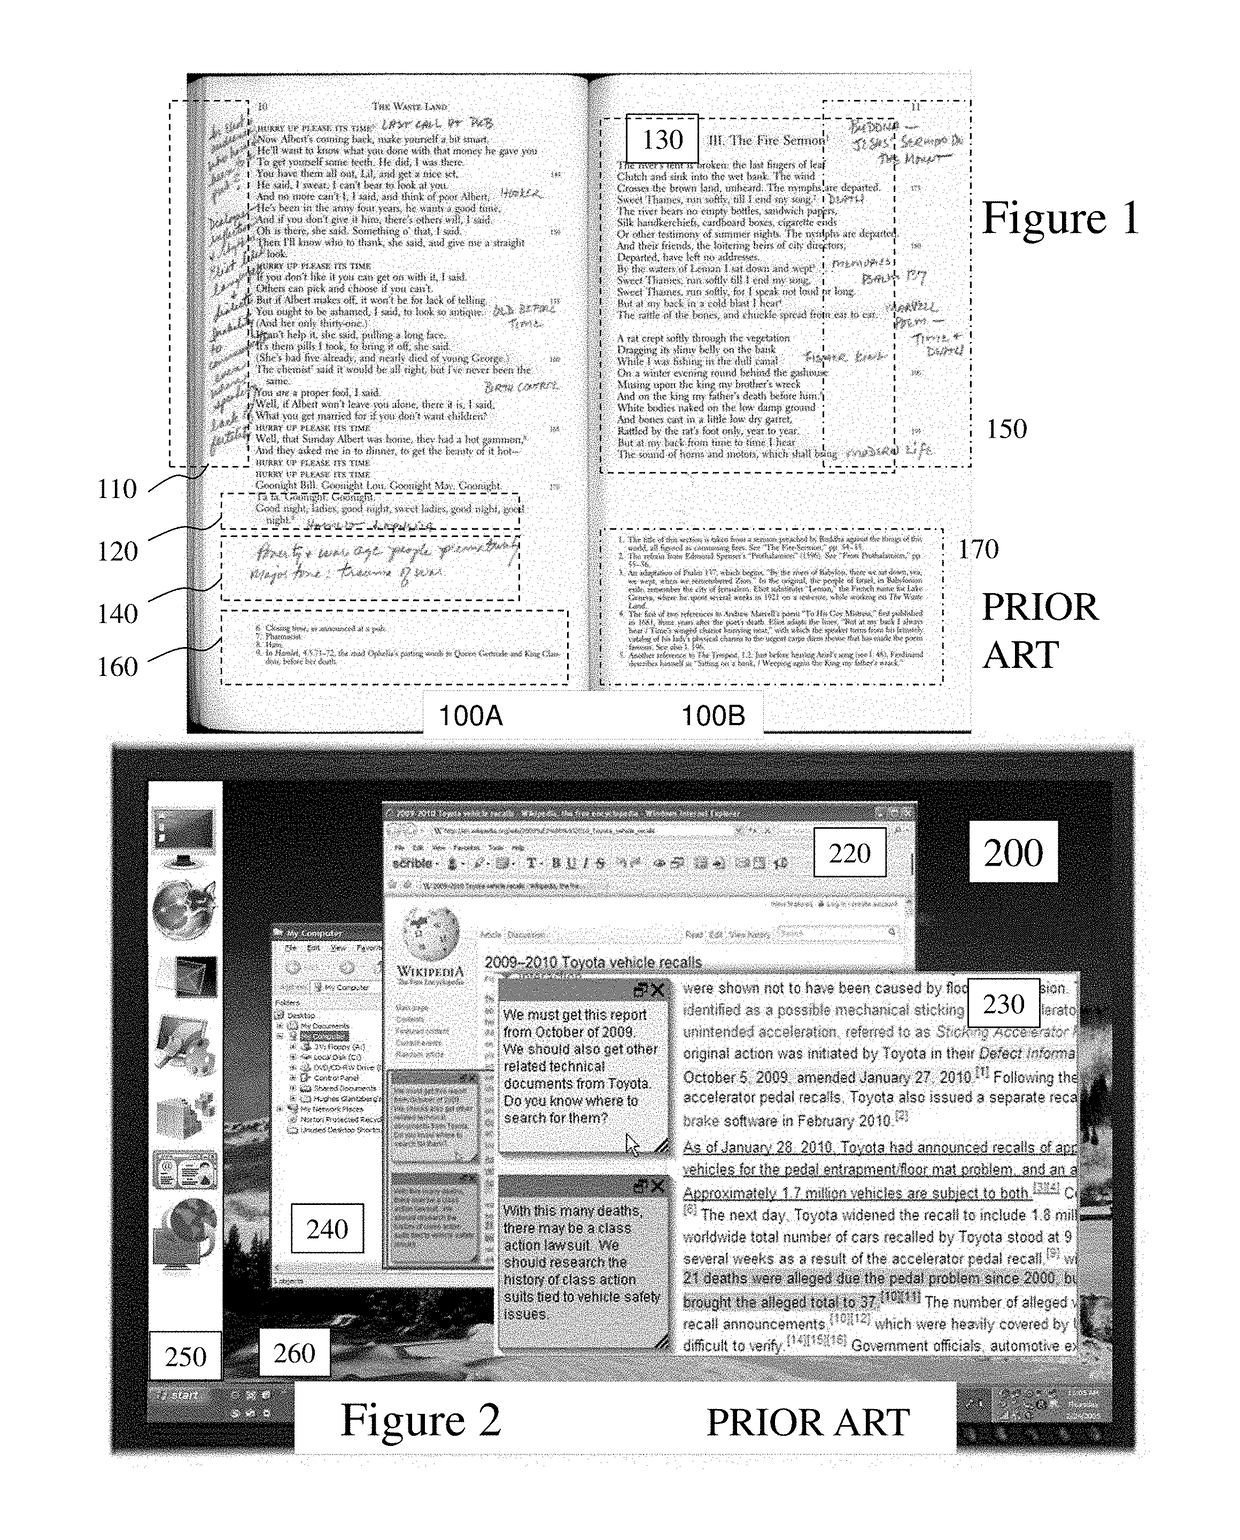 Methods of distributing digital publications incorporating user generated and encrypted content with unique fingerprints